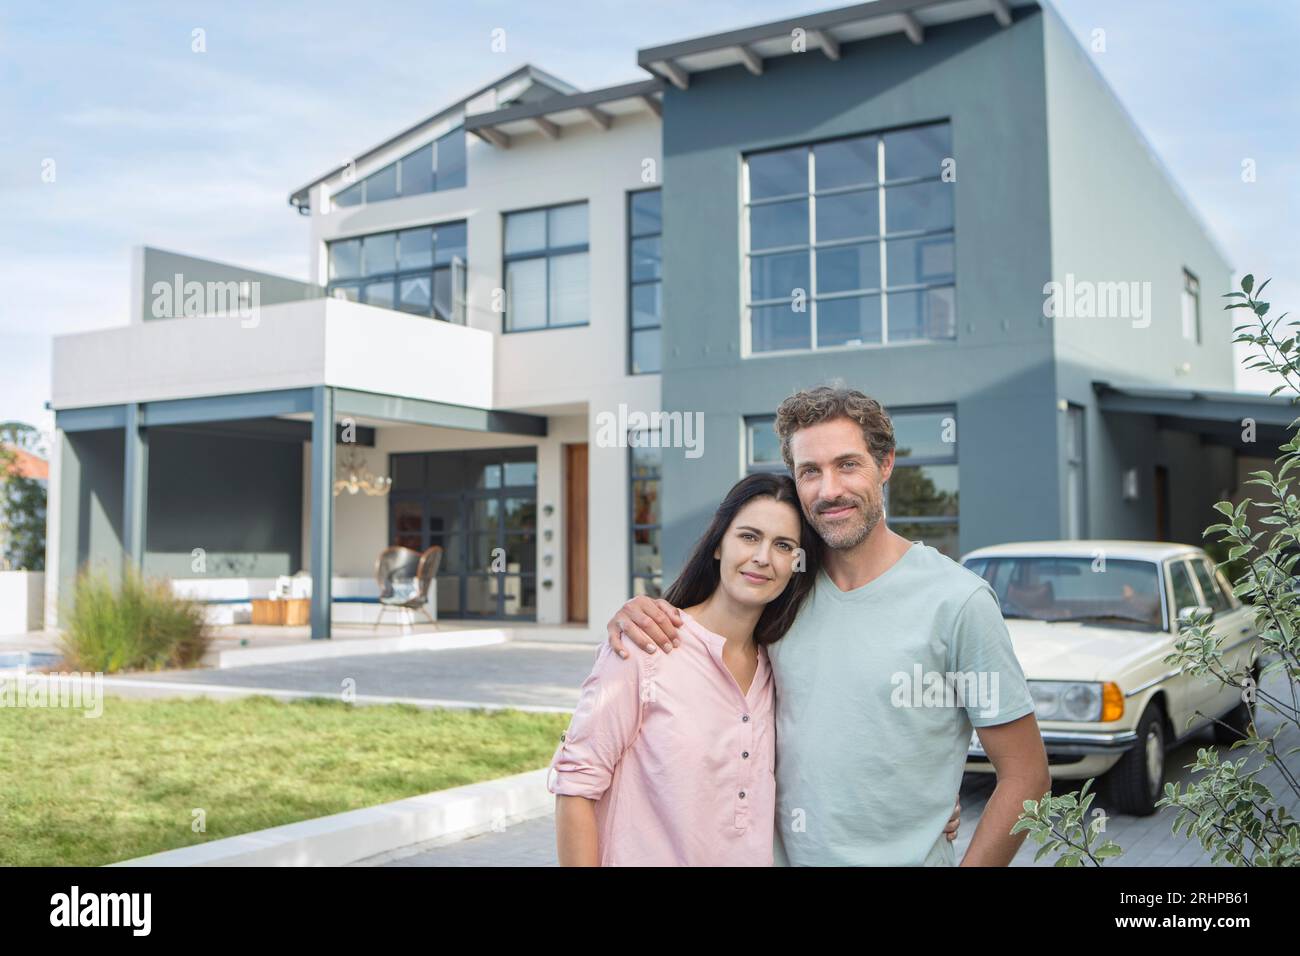 Couple in front of home Stock Photo